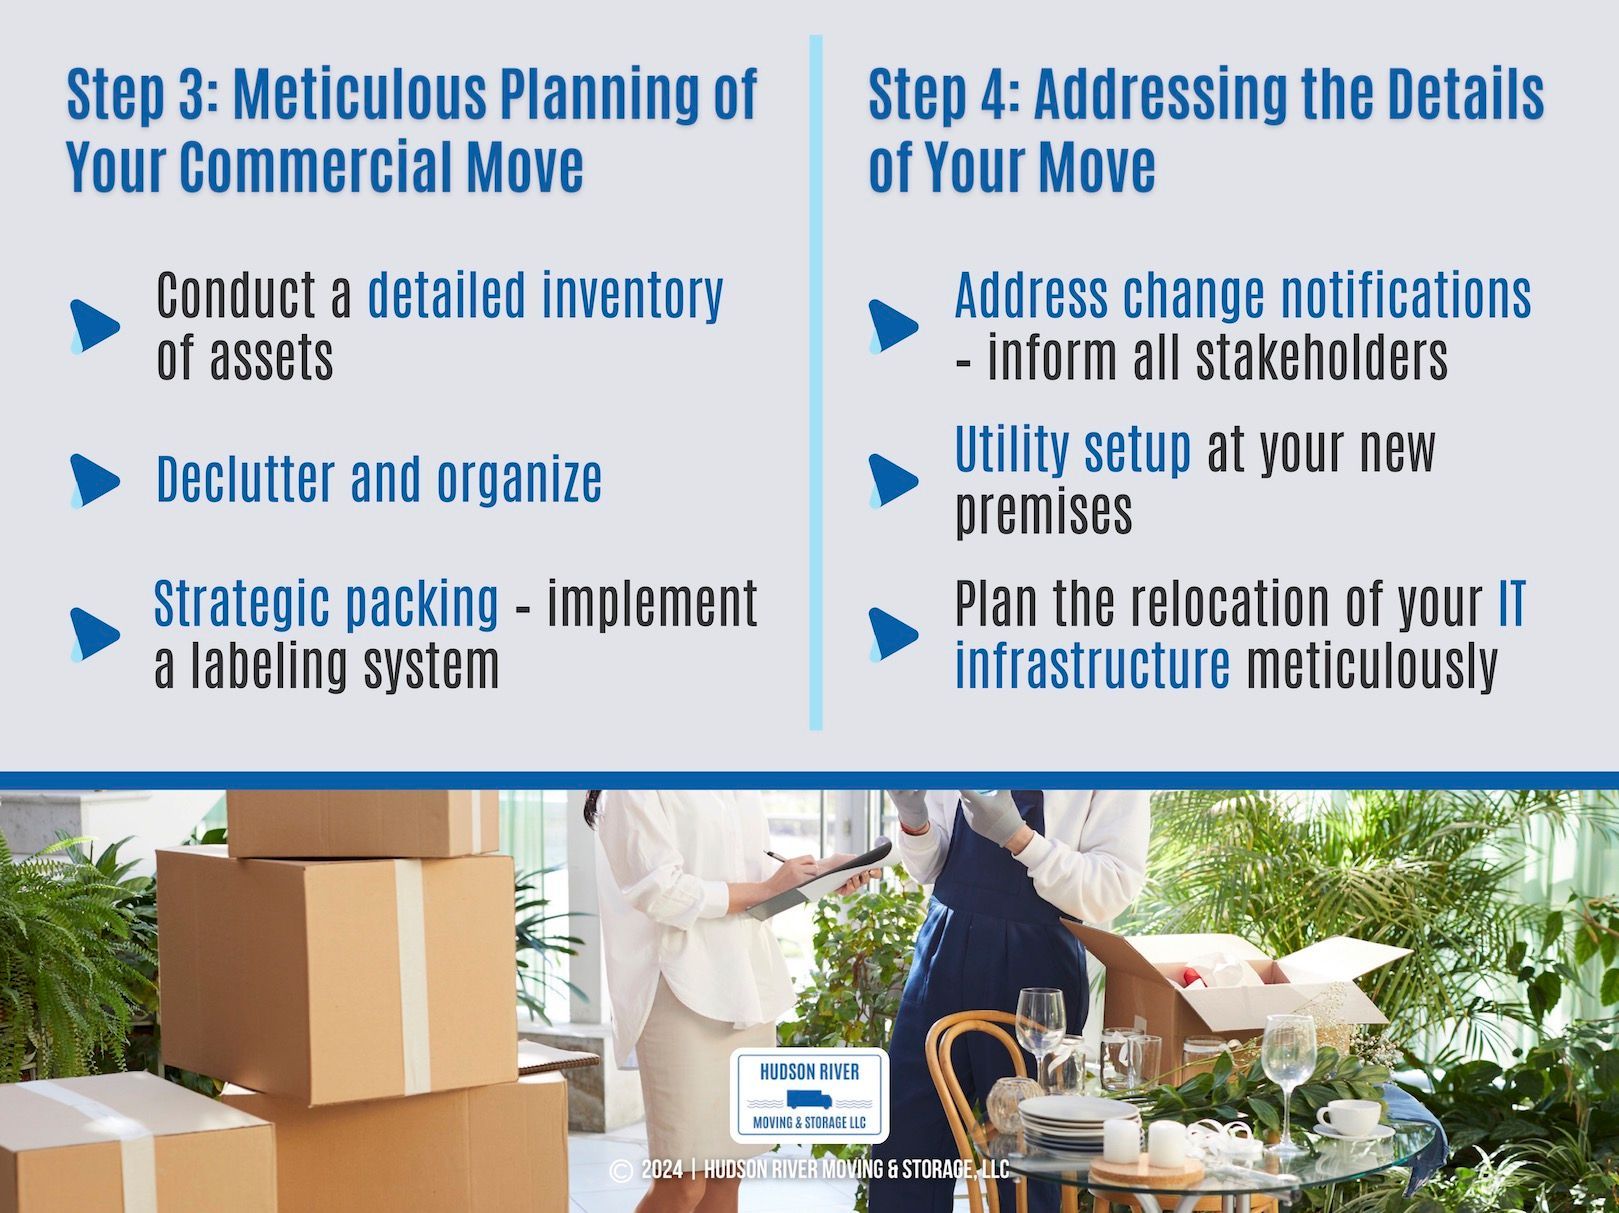 How to organize and address the specifics of a NYC commercial move, featuring strategic packing and utility setup advice.